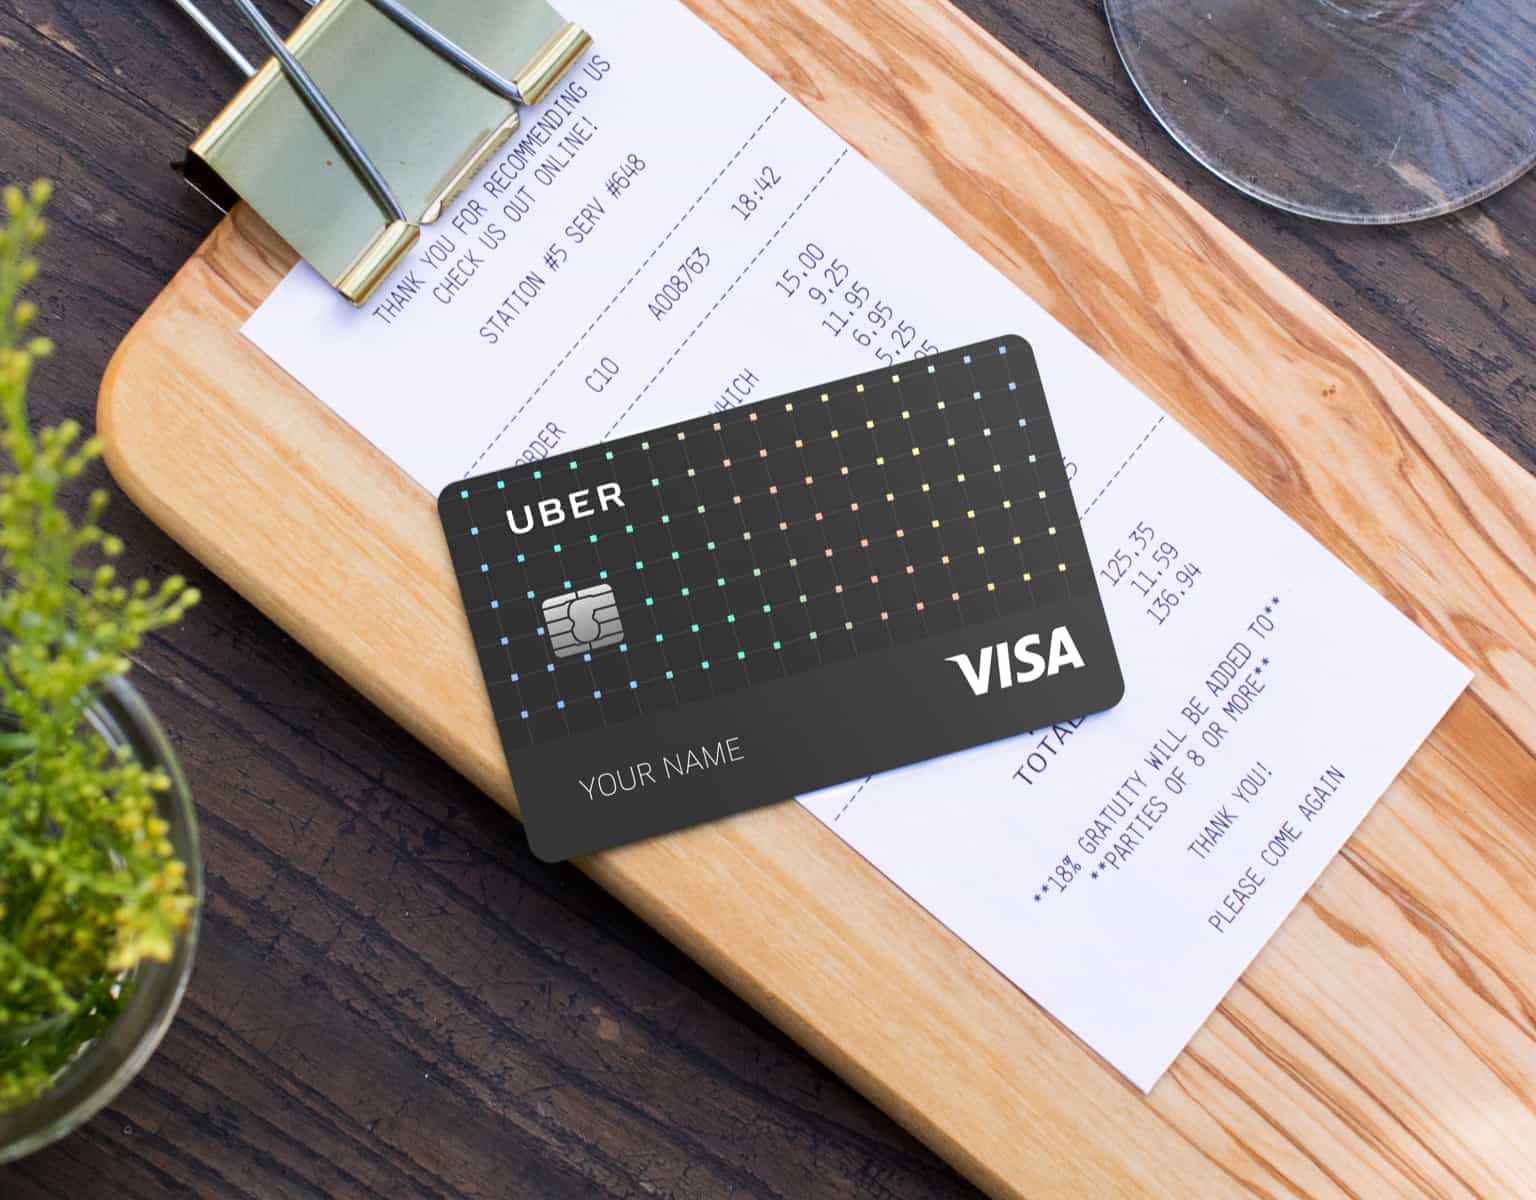 Best Credit Card According To Uber Drivers Cash Back On Gas